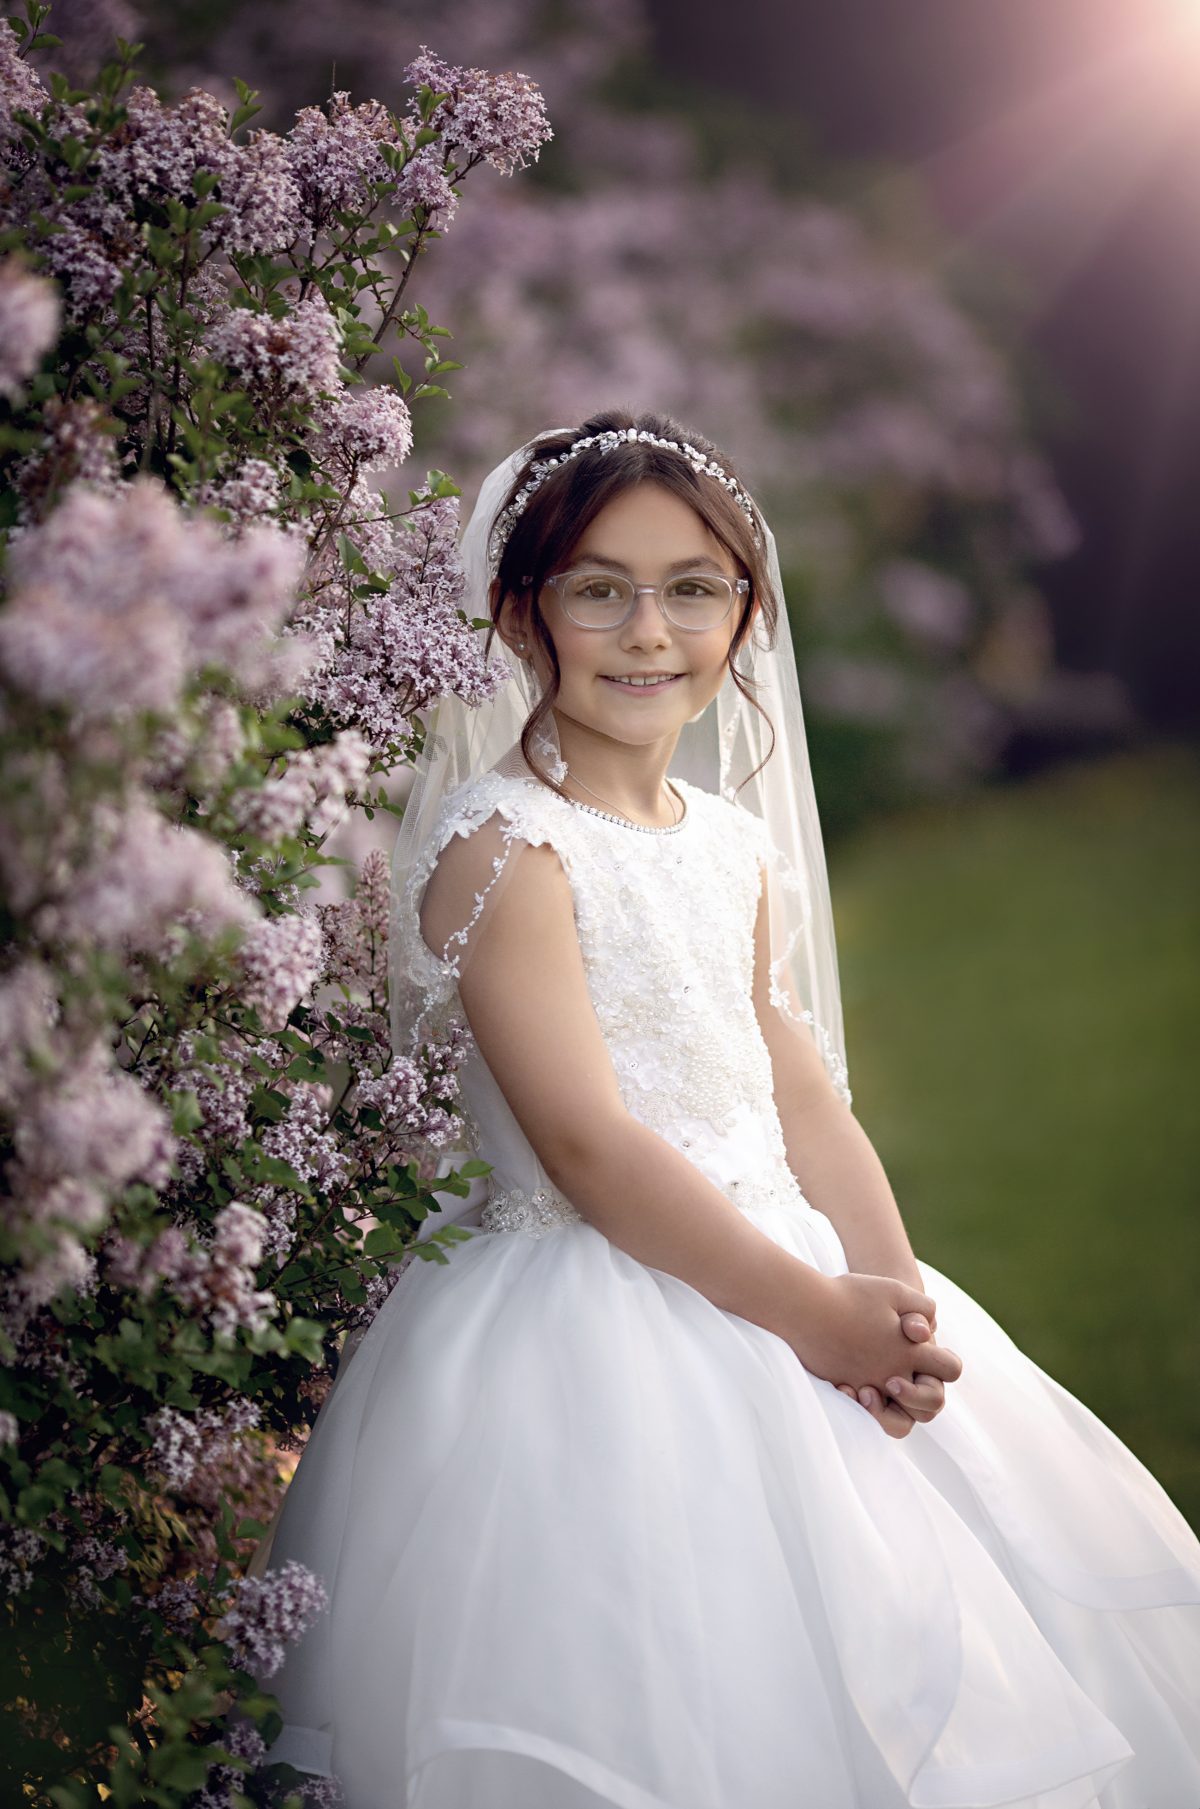 A young girl with glasses stands among some pink flowering bushes in a white communion dress